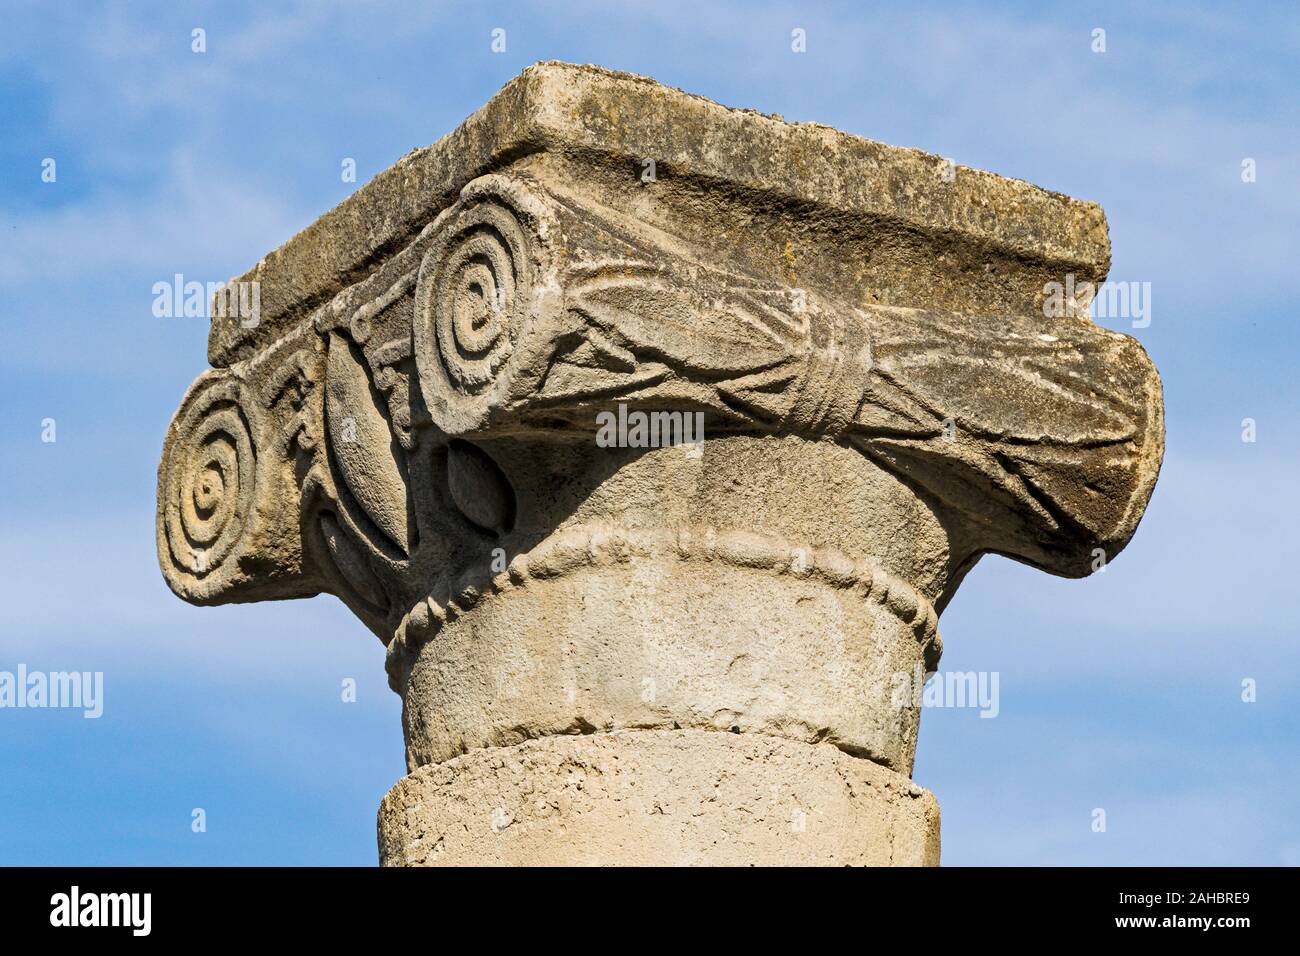 closeup of a classic greek ionic capital at the talmudic era archaeological site in Katzrin in Israel against a partly cloudy blue sky Stock Photo